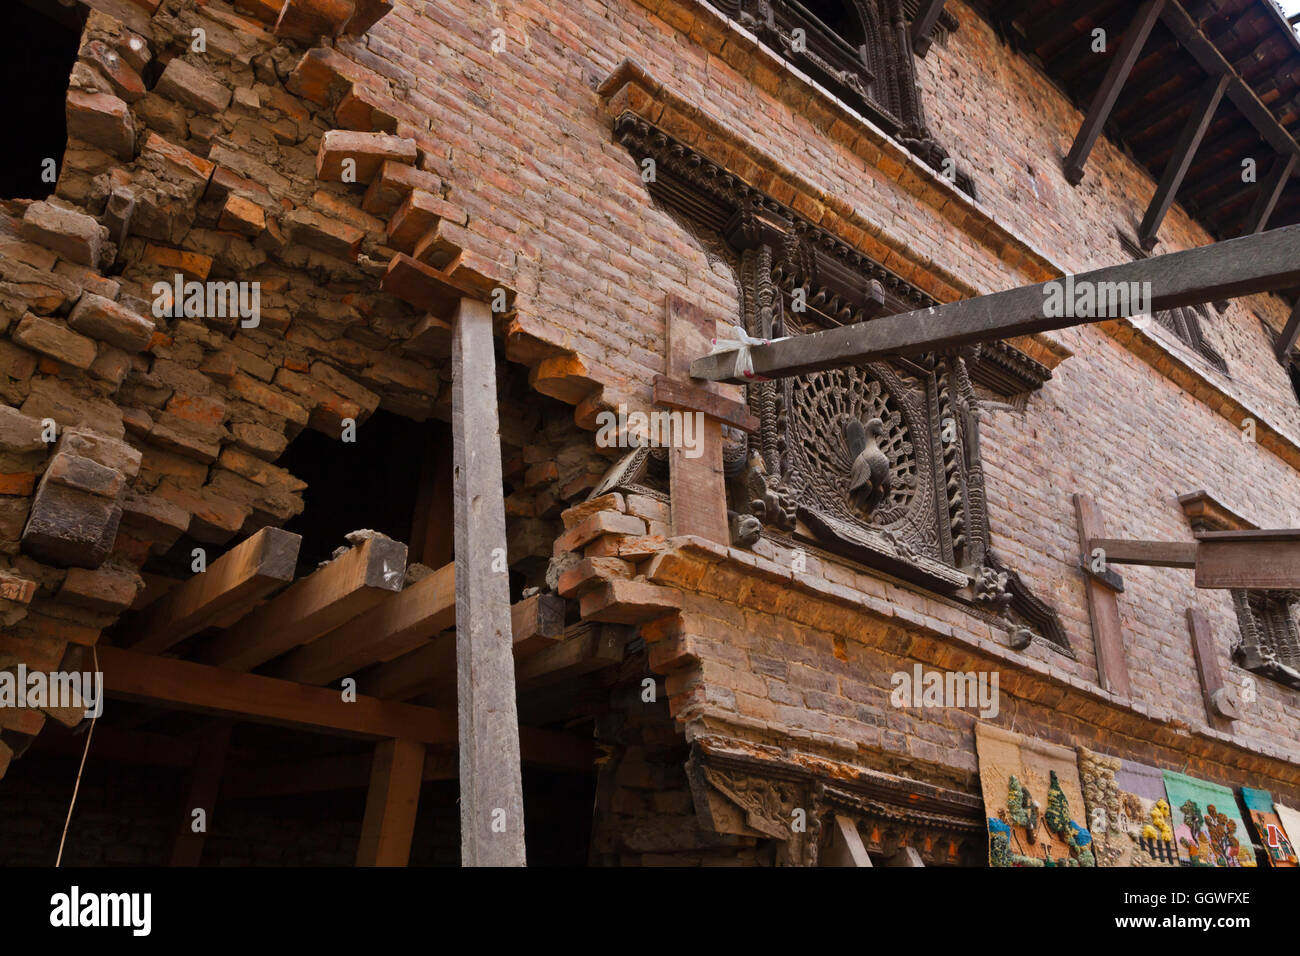 The traditional town of BHAKTAPUR which was severely damaged by the 2015 earthquake including the famous PEACOCK WINDOW - NEPAL Stock Photo